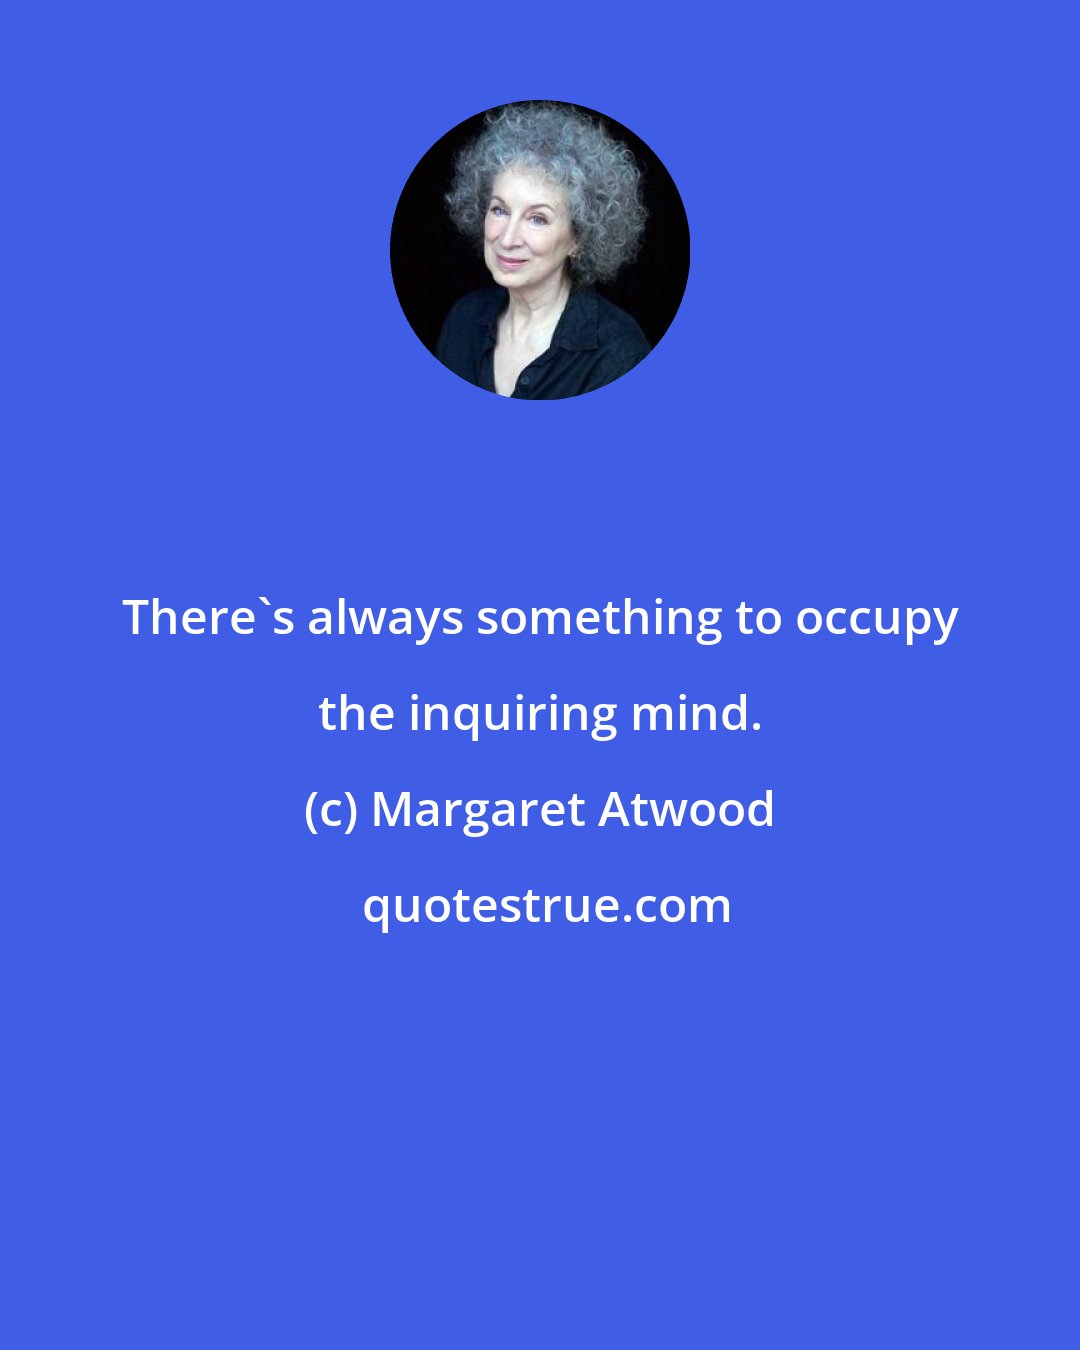 Margaret Atwood: There's always something to occupy the inquiring mind.